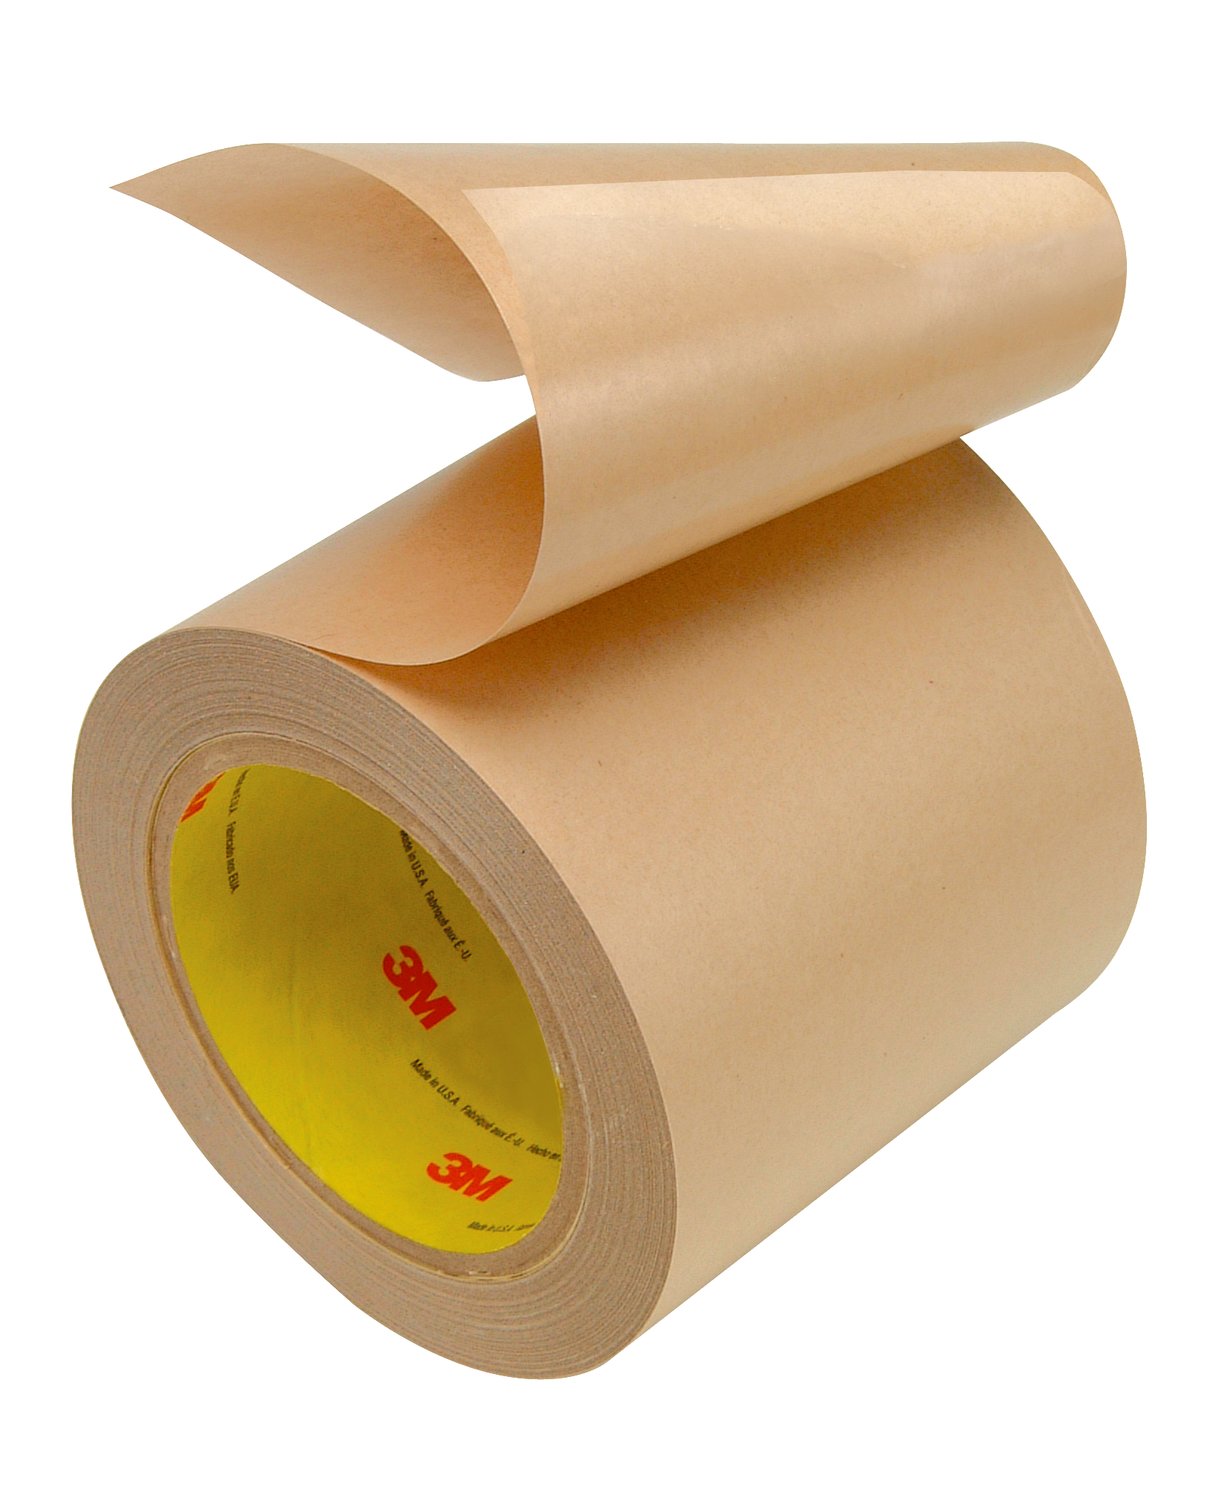 7010333907 - 3M Electrically Conductive Adhesive Transfer Tape 9703, 1/4 in x 36 yd,
36 rolls per case